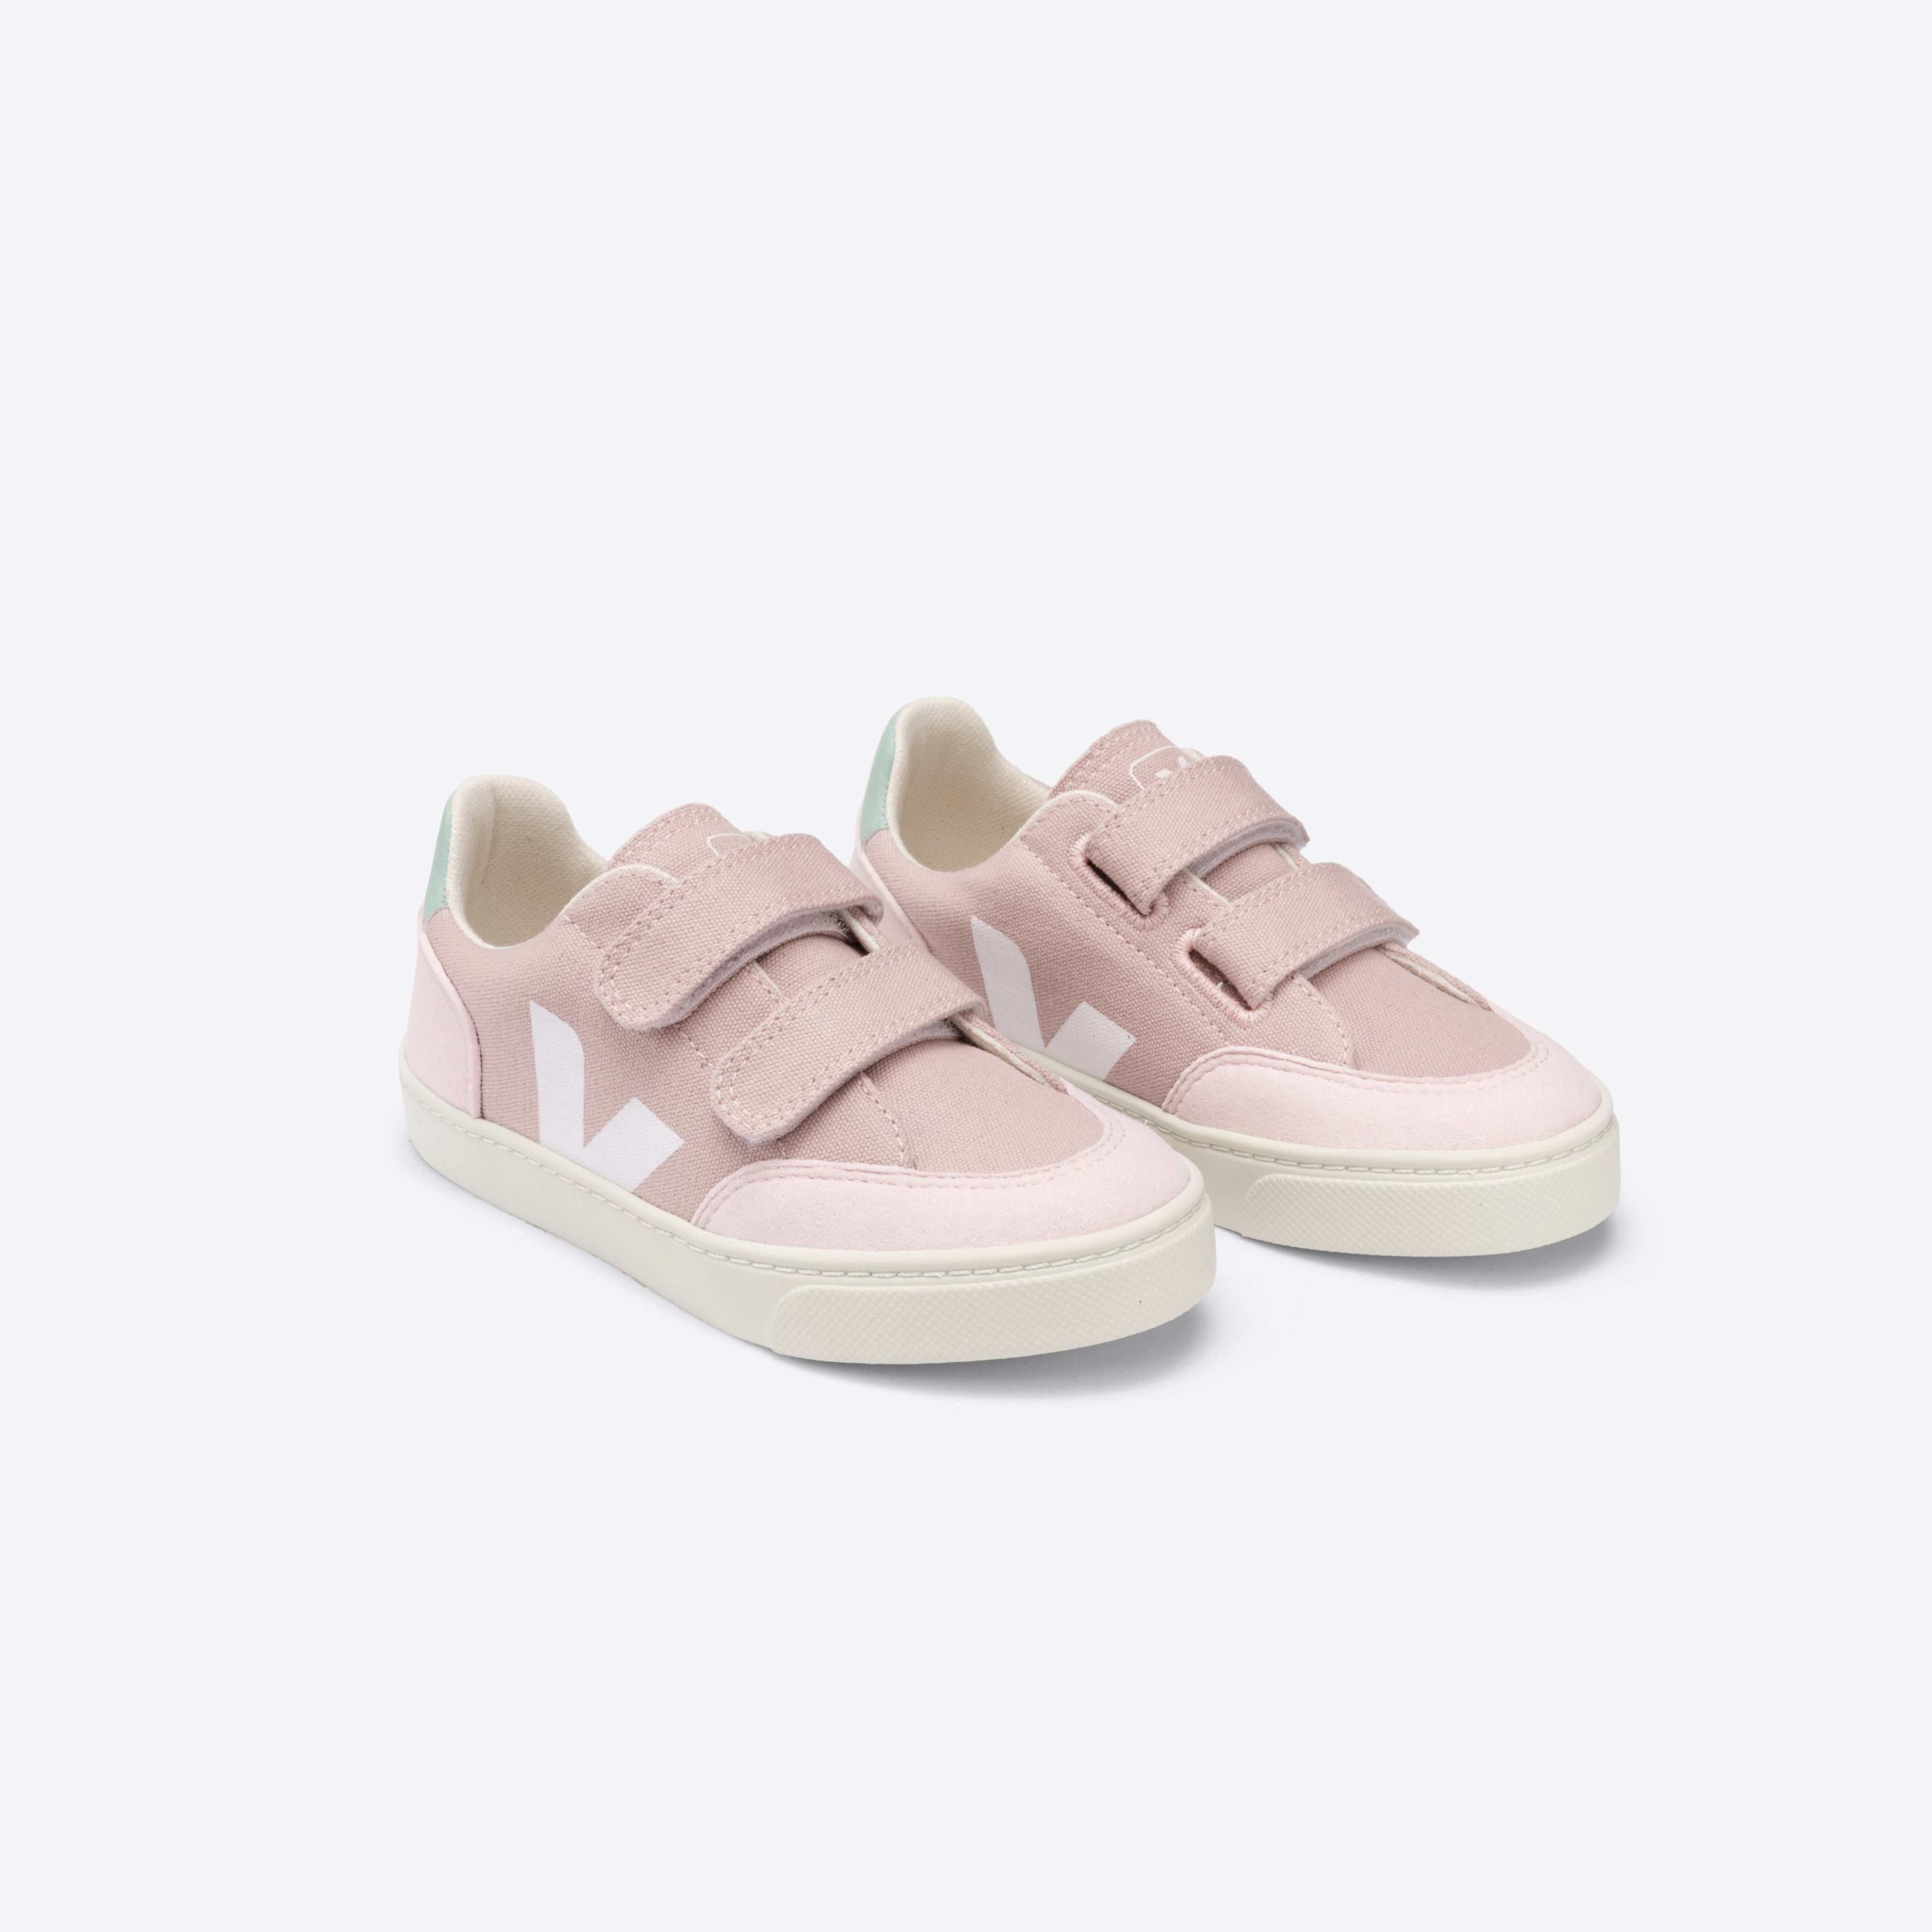 Girls Pink "SMALL V-12" Velcro Canvas Shoes